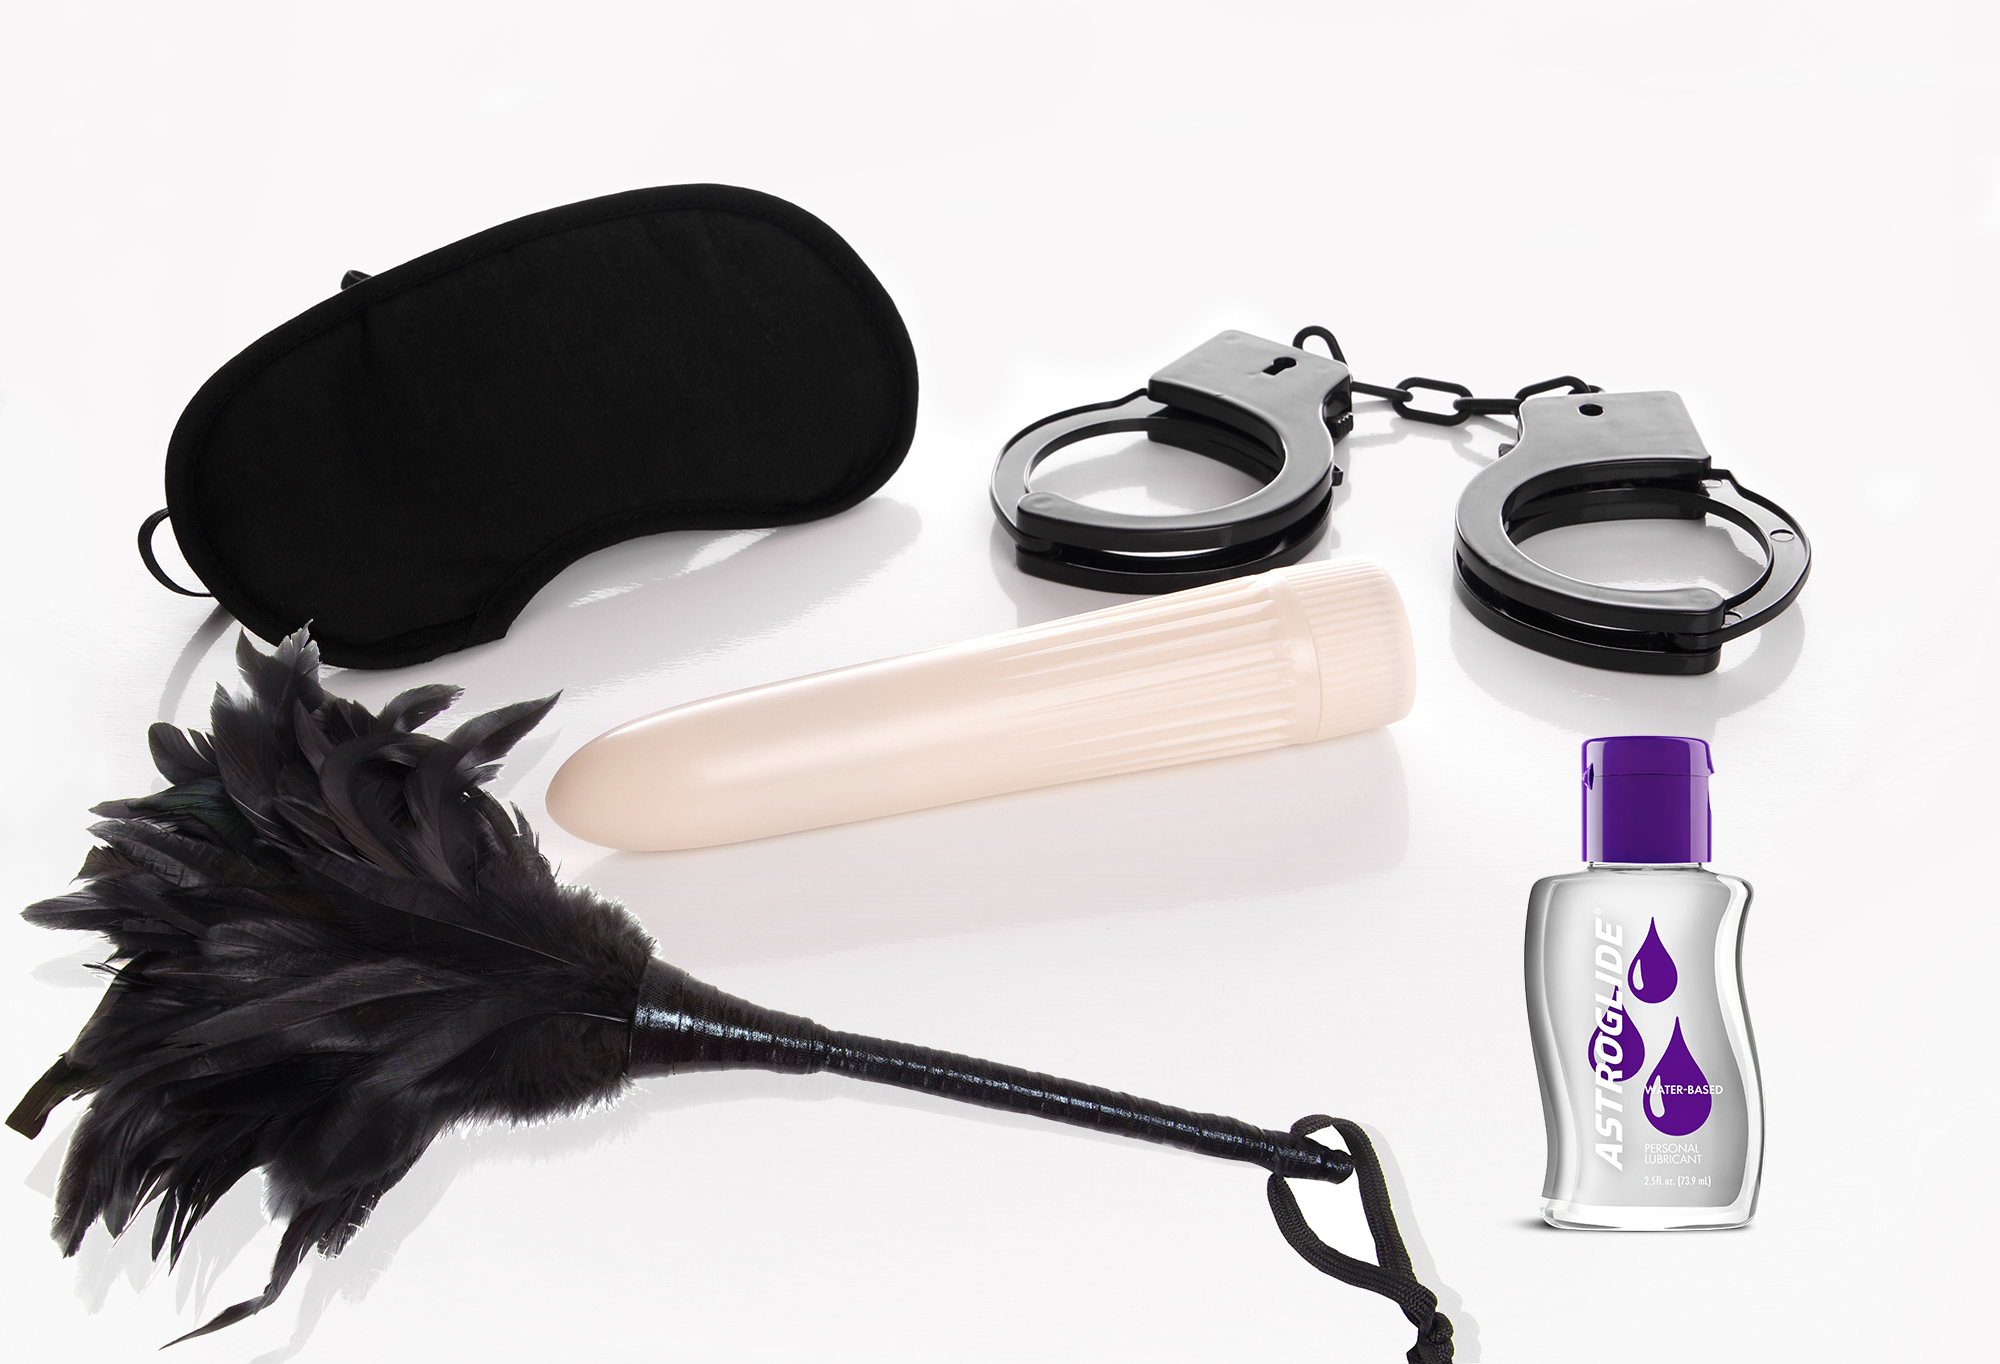 S&M Sex Toys: Must-Haves for Your Collection